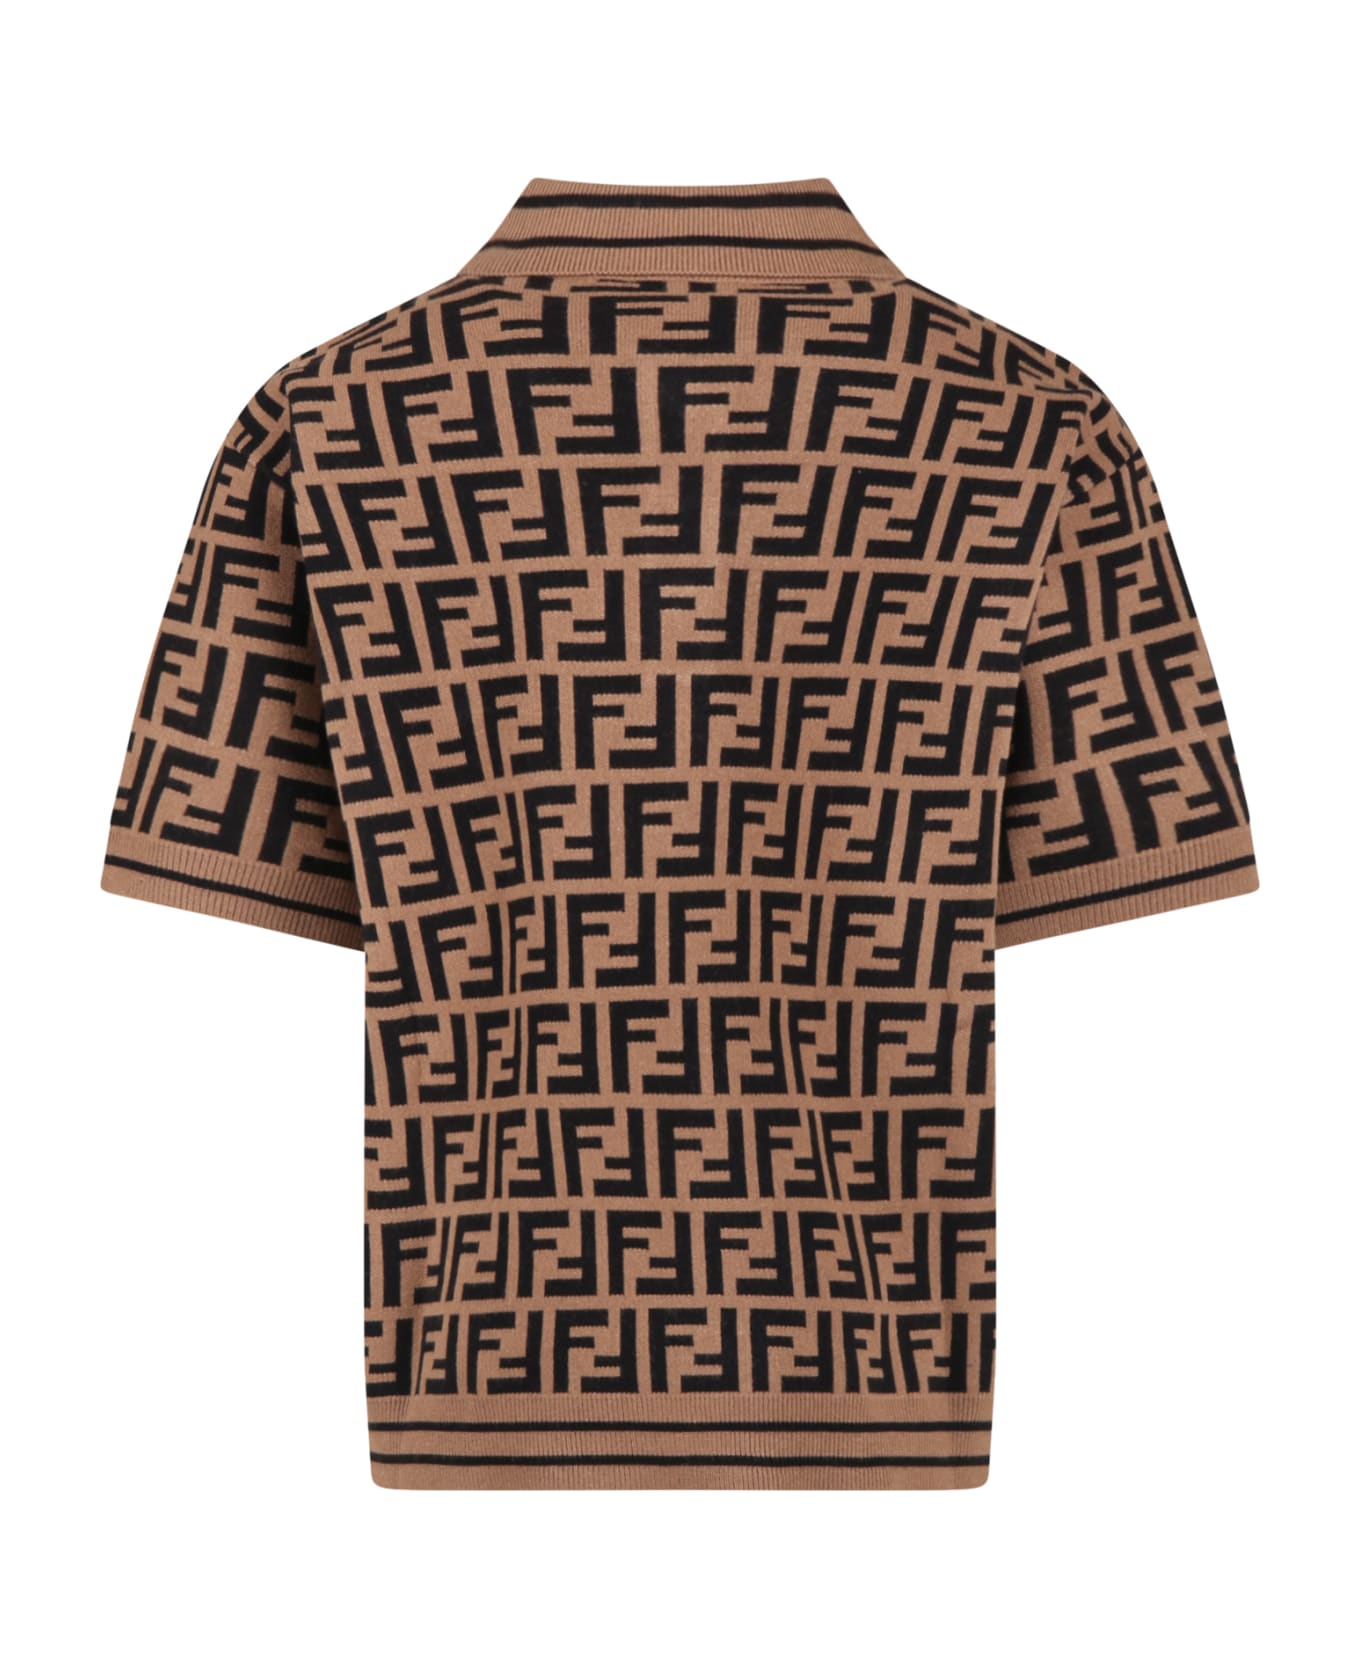 Fendi Brown Sweater For Boy With Ff - Brown